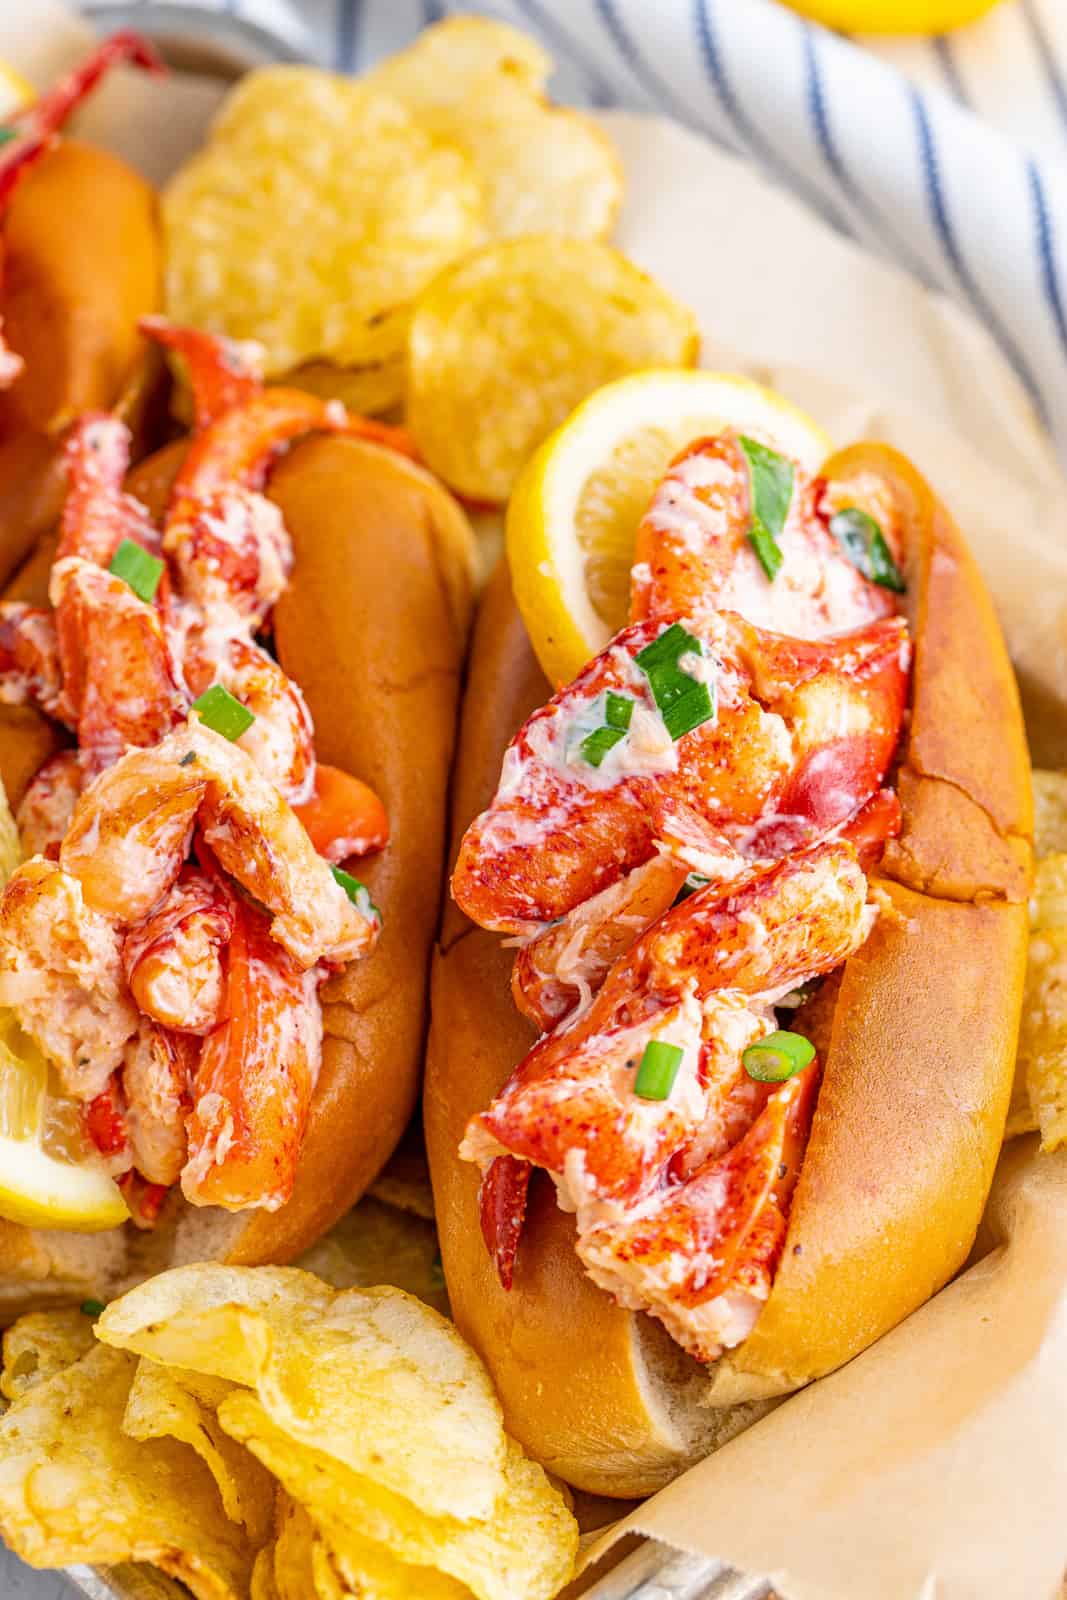 Two Lobster Rolls on tray with chips and lemon